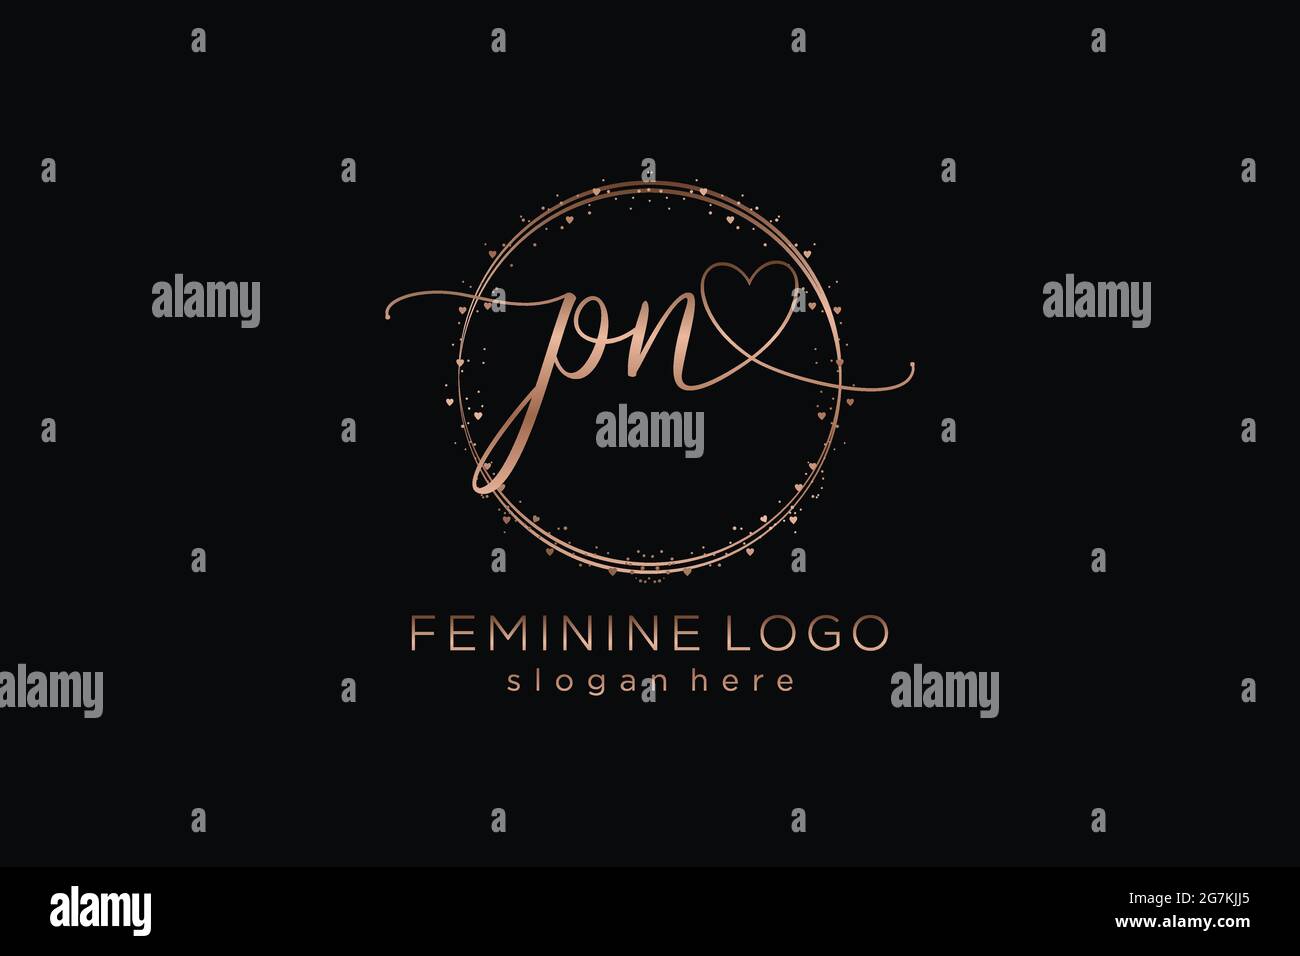 PN handwriting logo with circle template vector logo of initial wedding, fashion, floral and botanical with creative template. Stock Vector